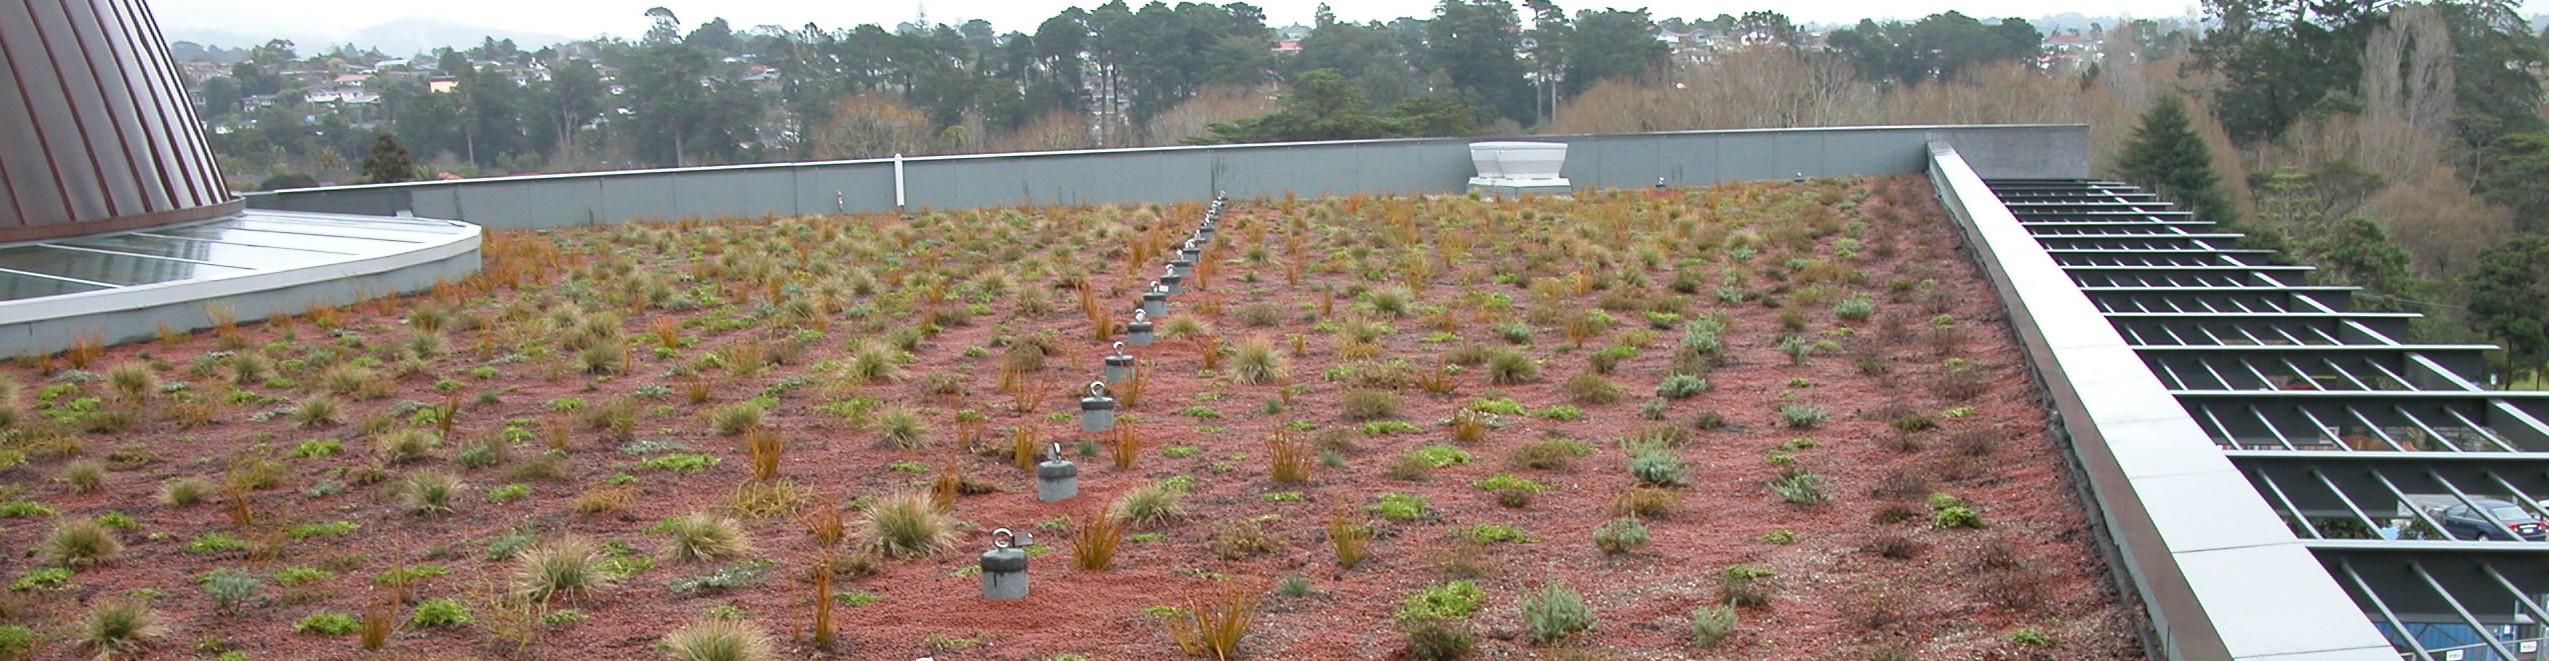 green roof cropped